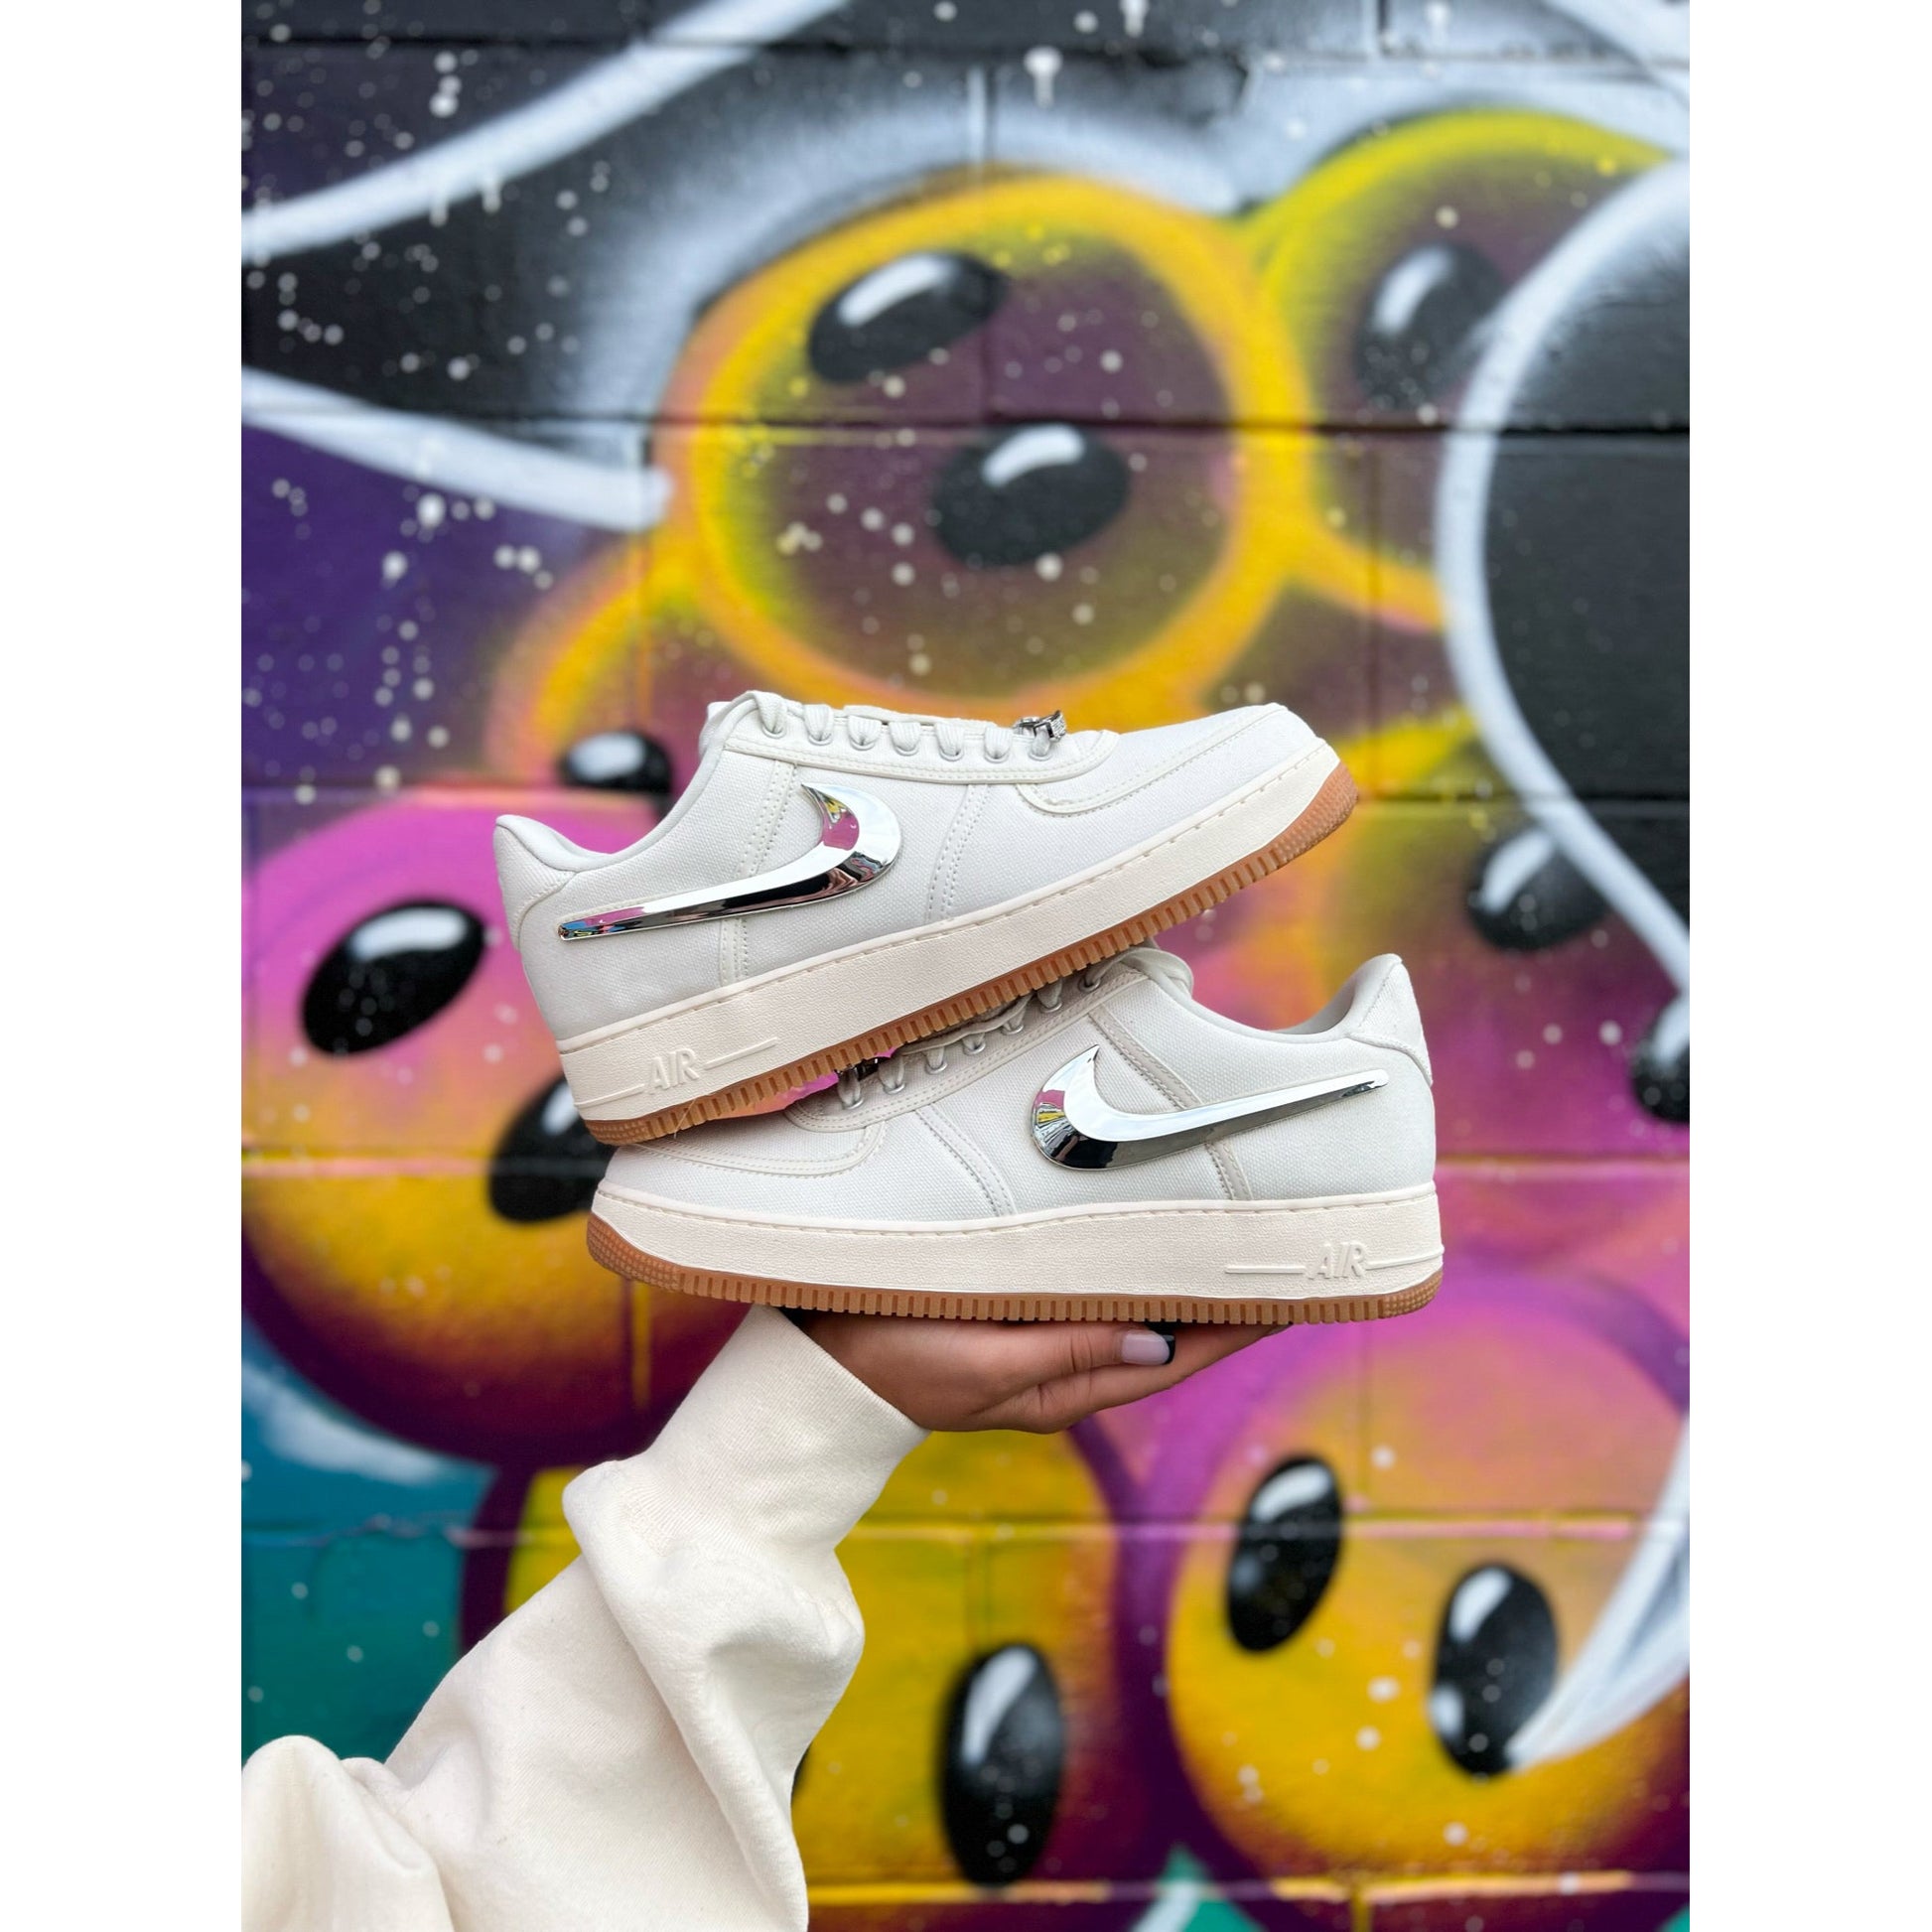 Nike Air Force 1 Low Travis Scott Sail by Nike from £1350.00